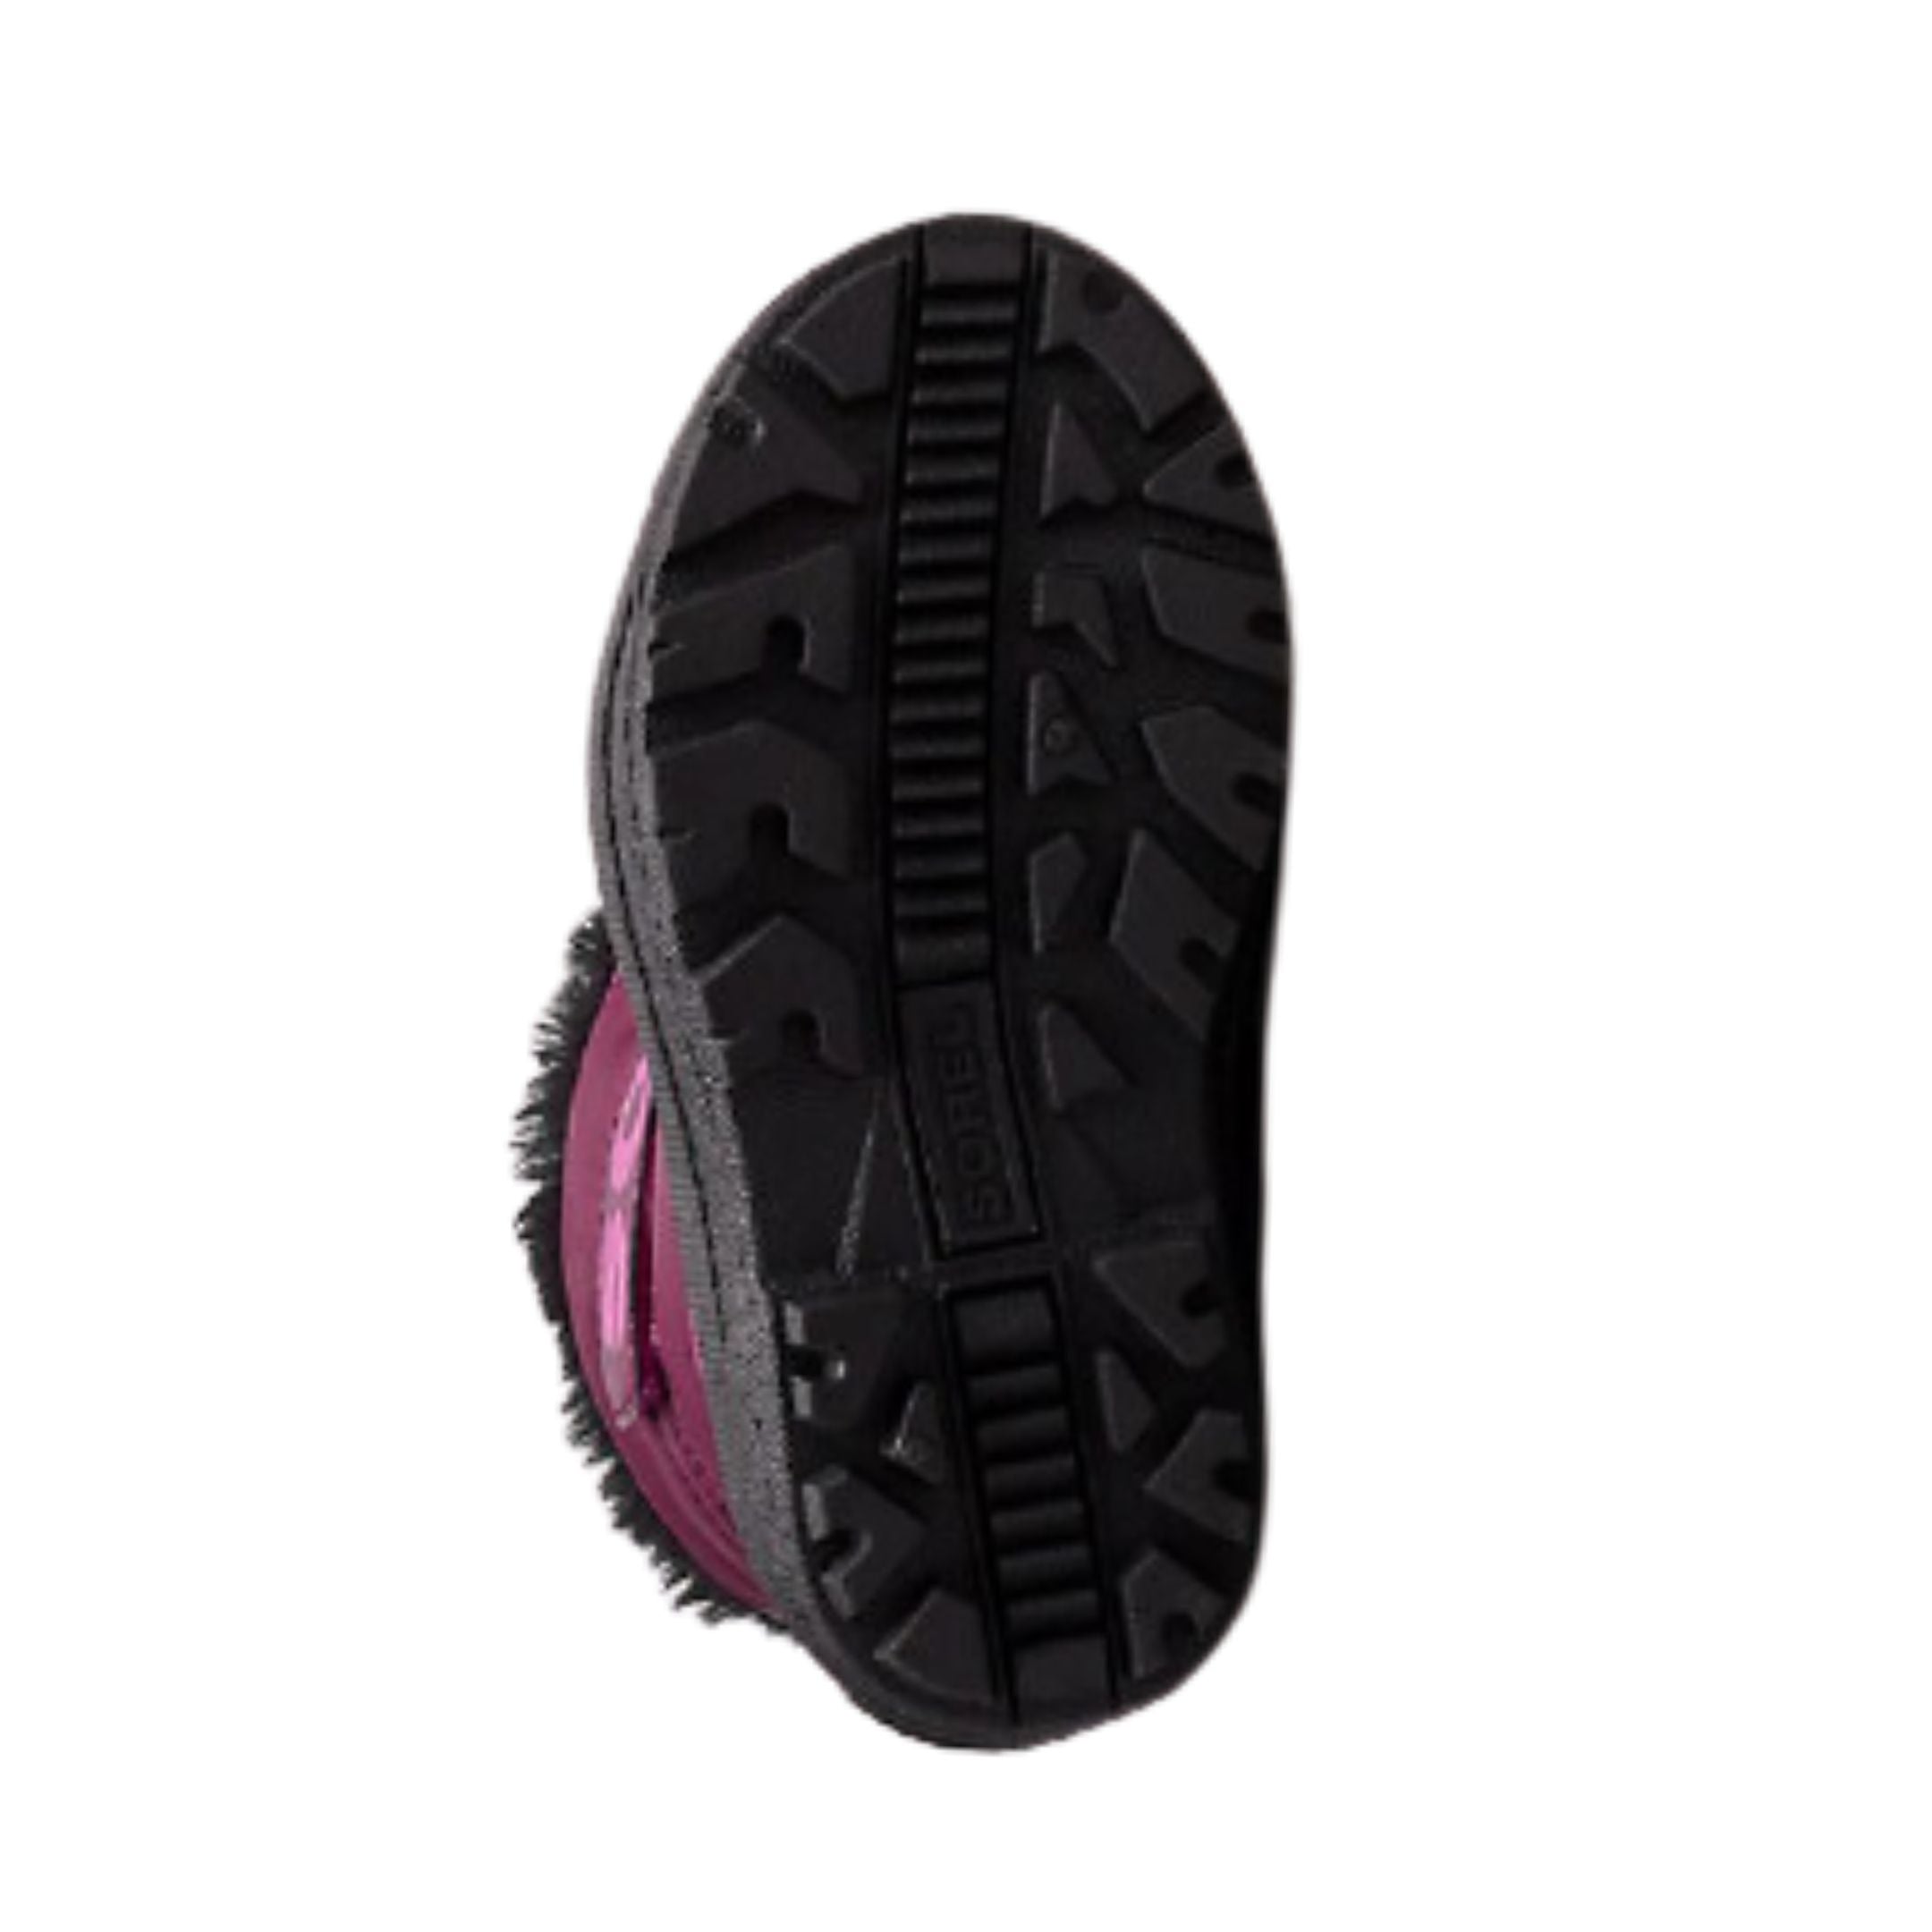 Black outsole with grip of Sorel Snow Commander boot